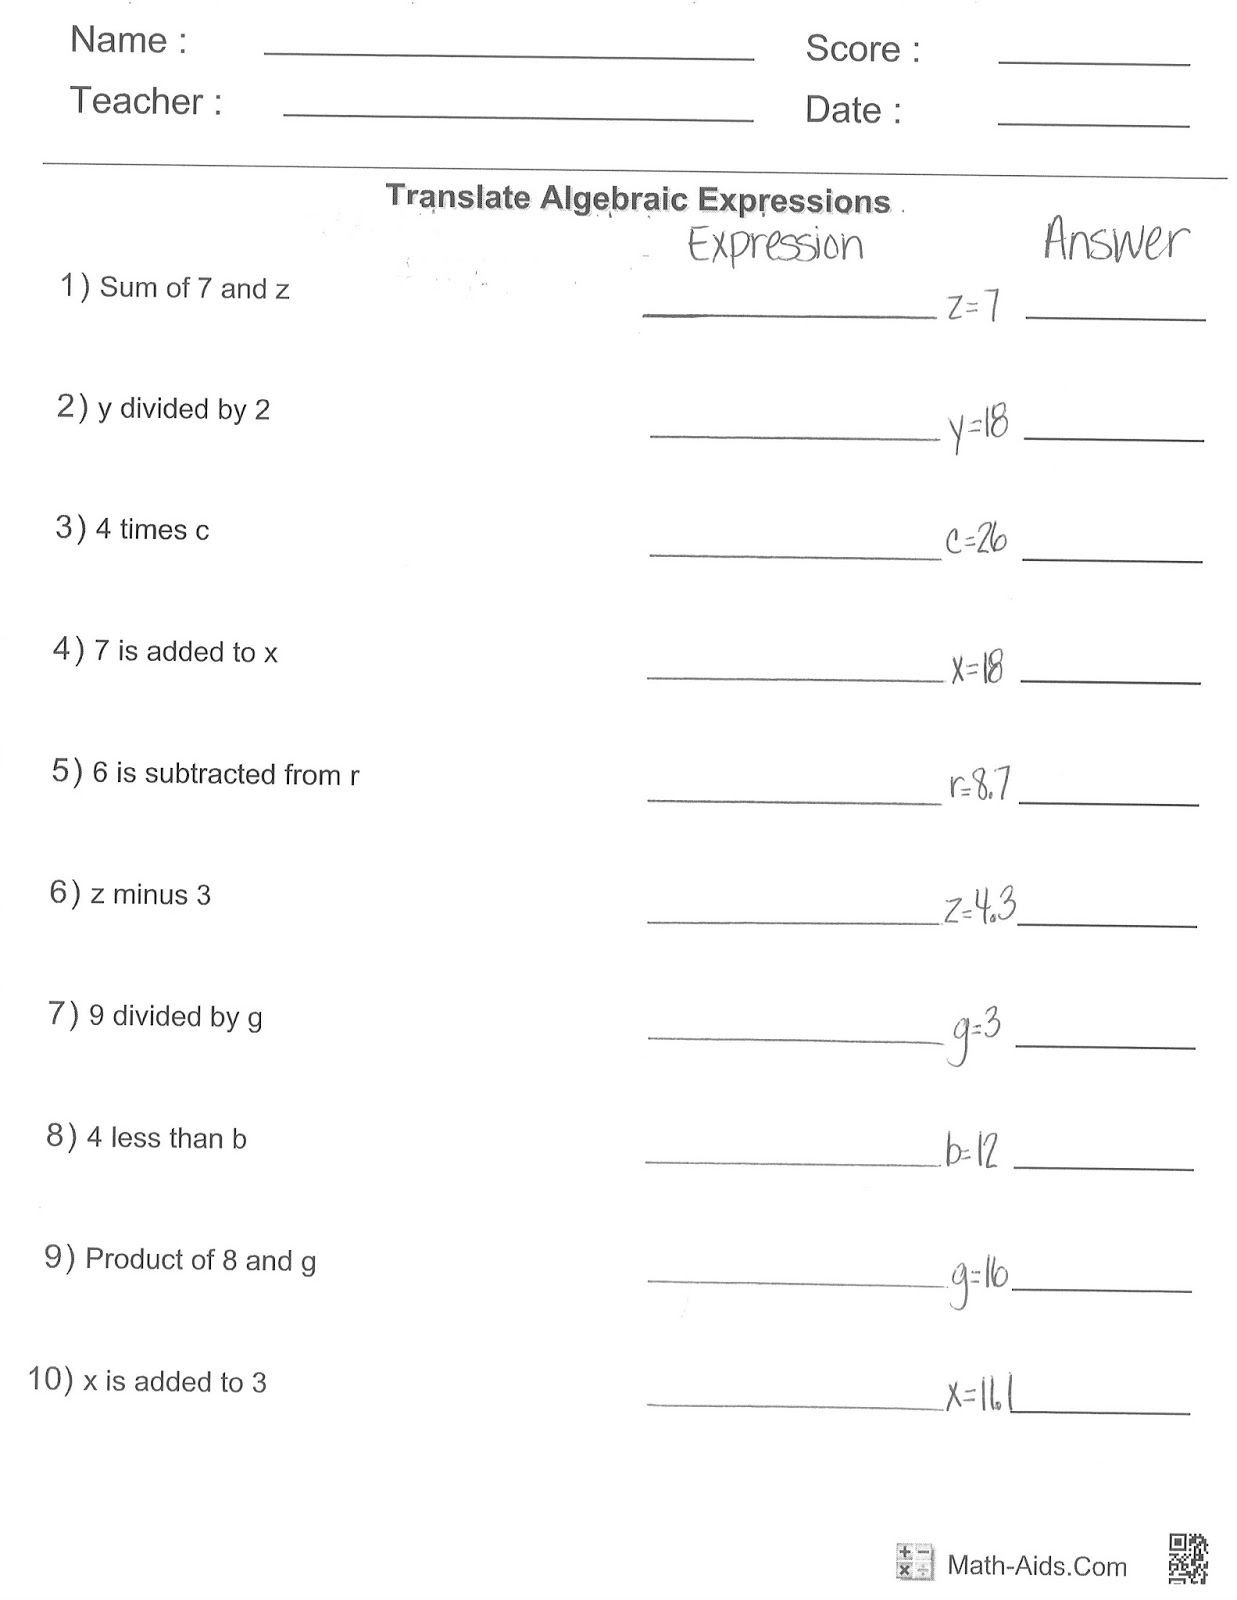 Writing and Evaluating Expressions Worksheet Mrs White S 6th Grade Math Blog Reading Writing and